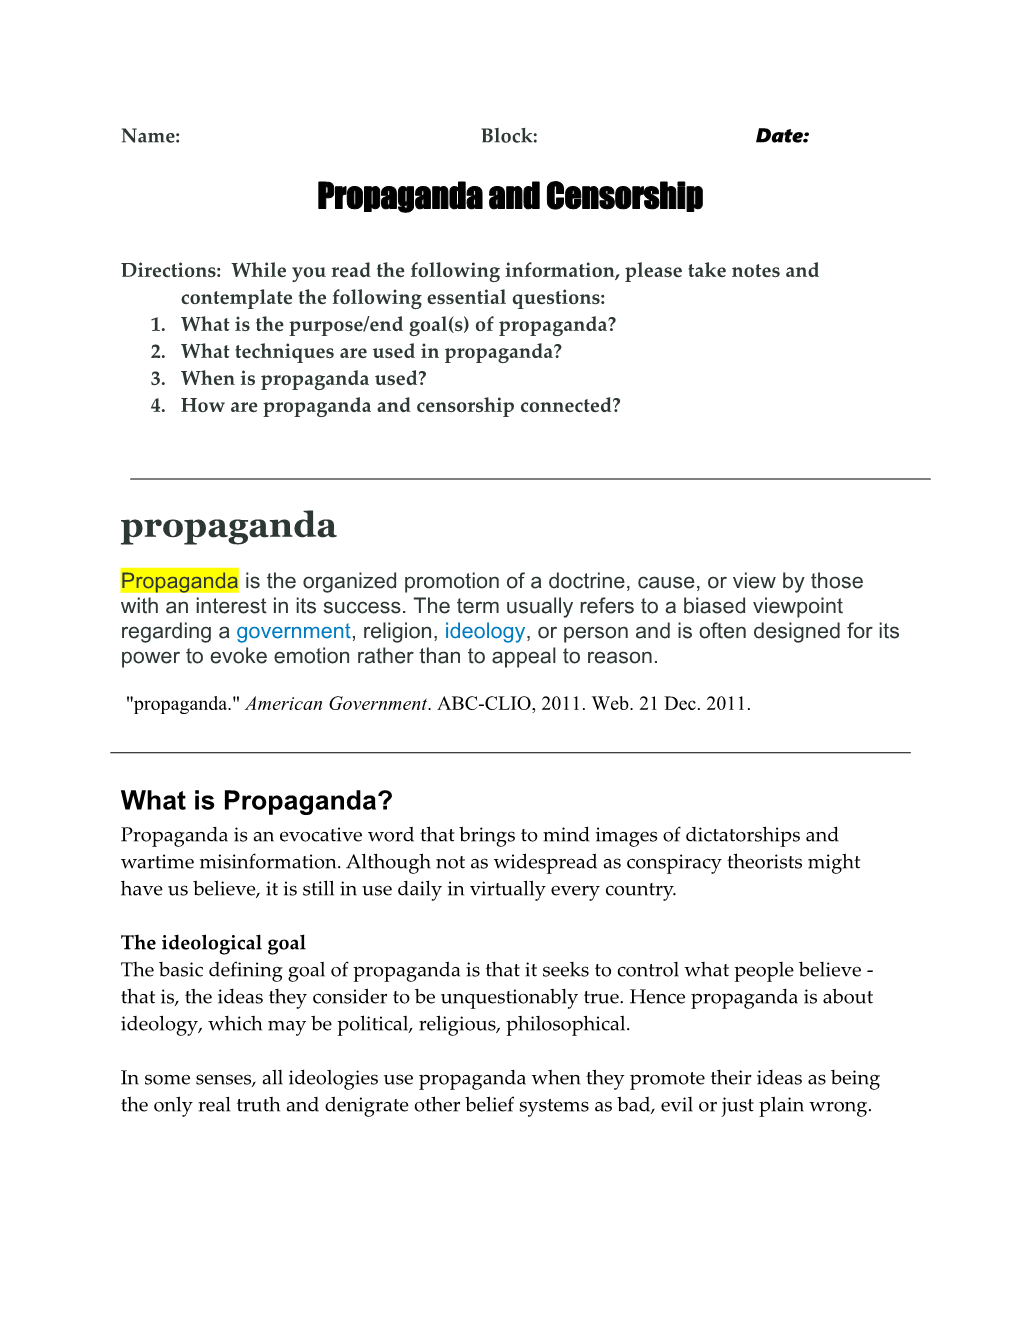 1.What Is the Purpose/End Goal(S) of Propaganda?